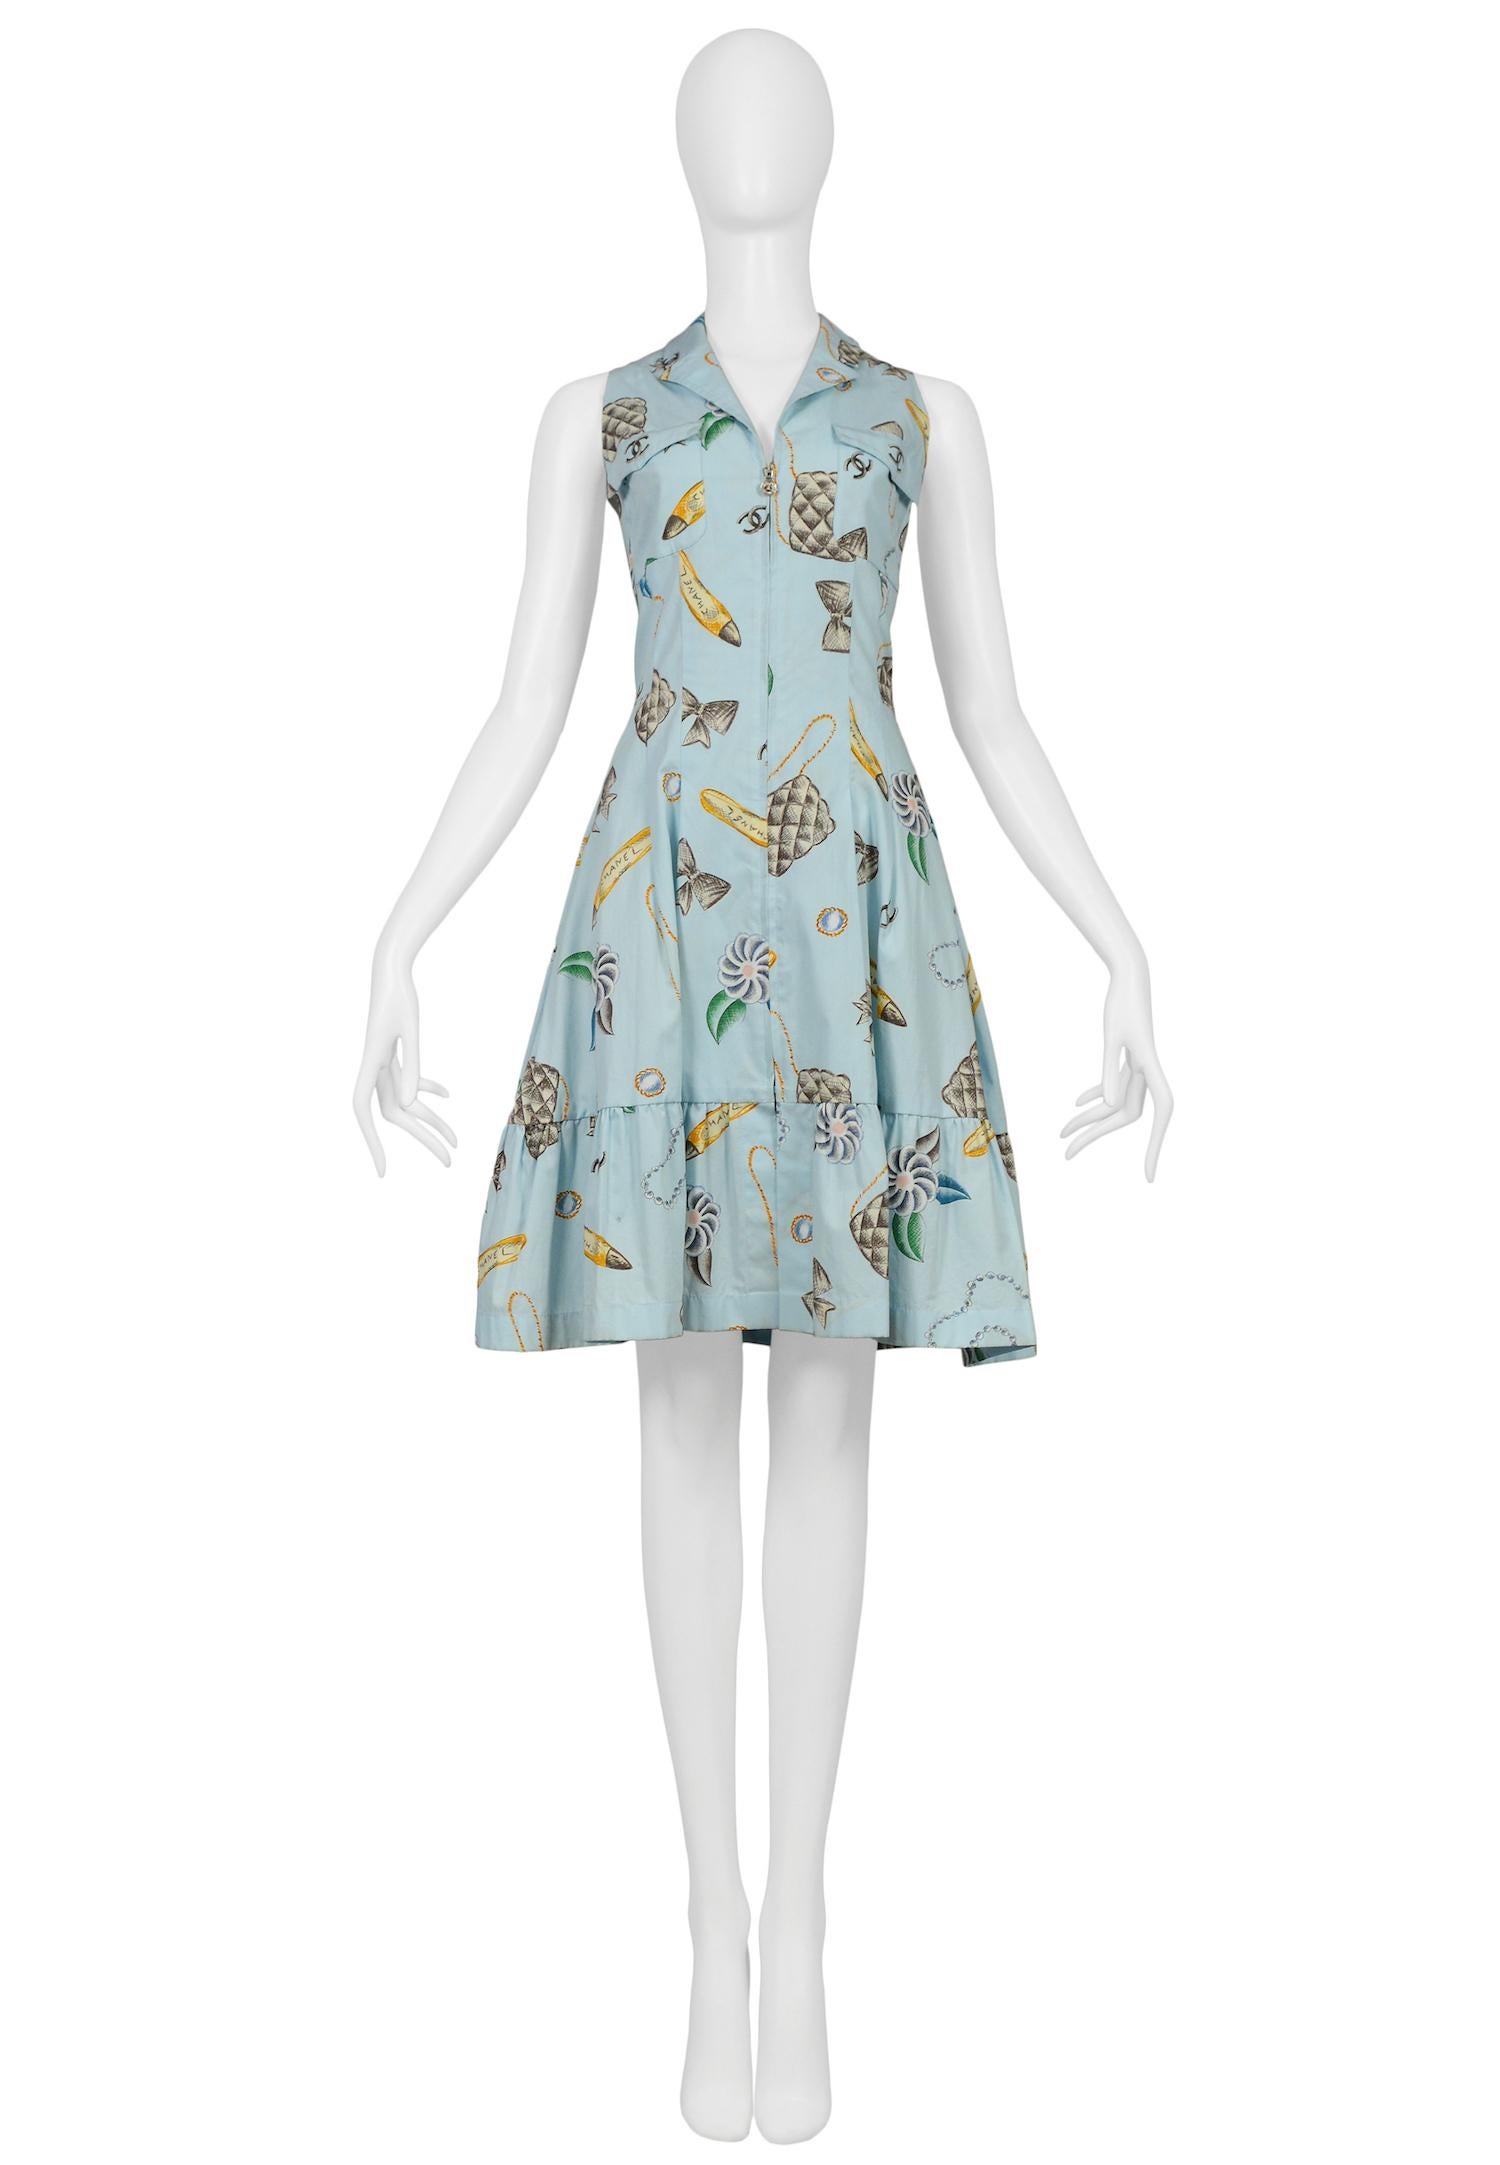 Vintage Chanel blue cotton sleeveless shirt dress featuring chest pockets, a front zipper closure, a flounce at the hem and an allover floral bag, bow, and shoe print. Collection 1996.

Excellent Vintage Condition.

Size 38

Measurements:
Bust